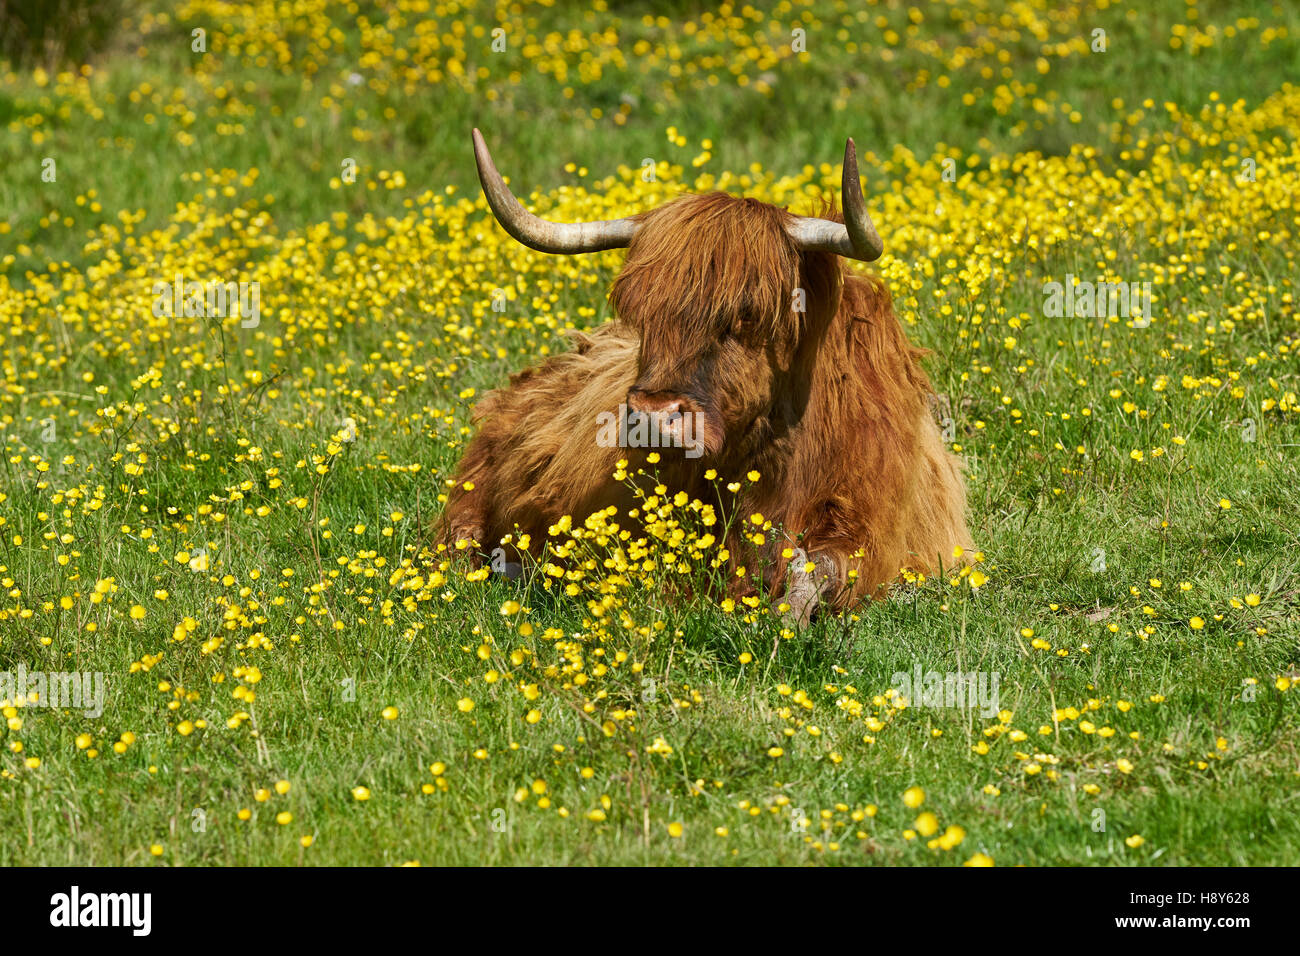 Highland cow sitting in a field of buttercups Stock Photo